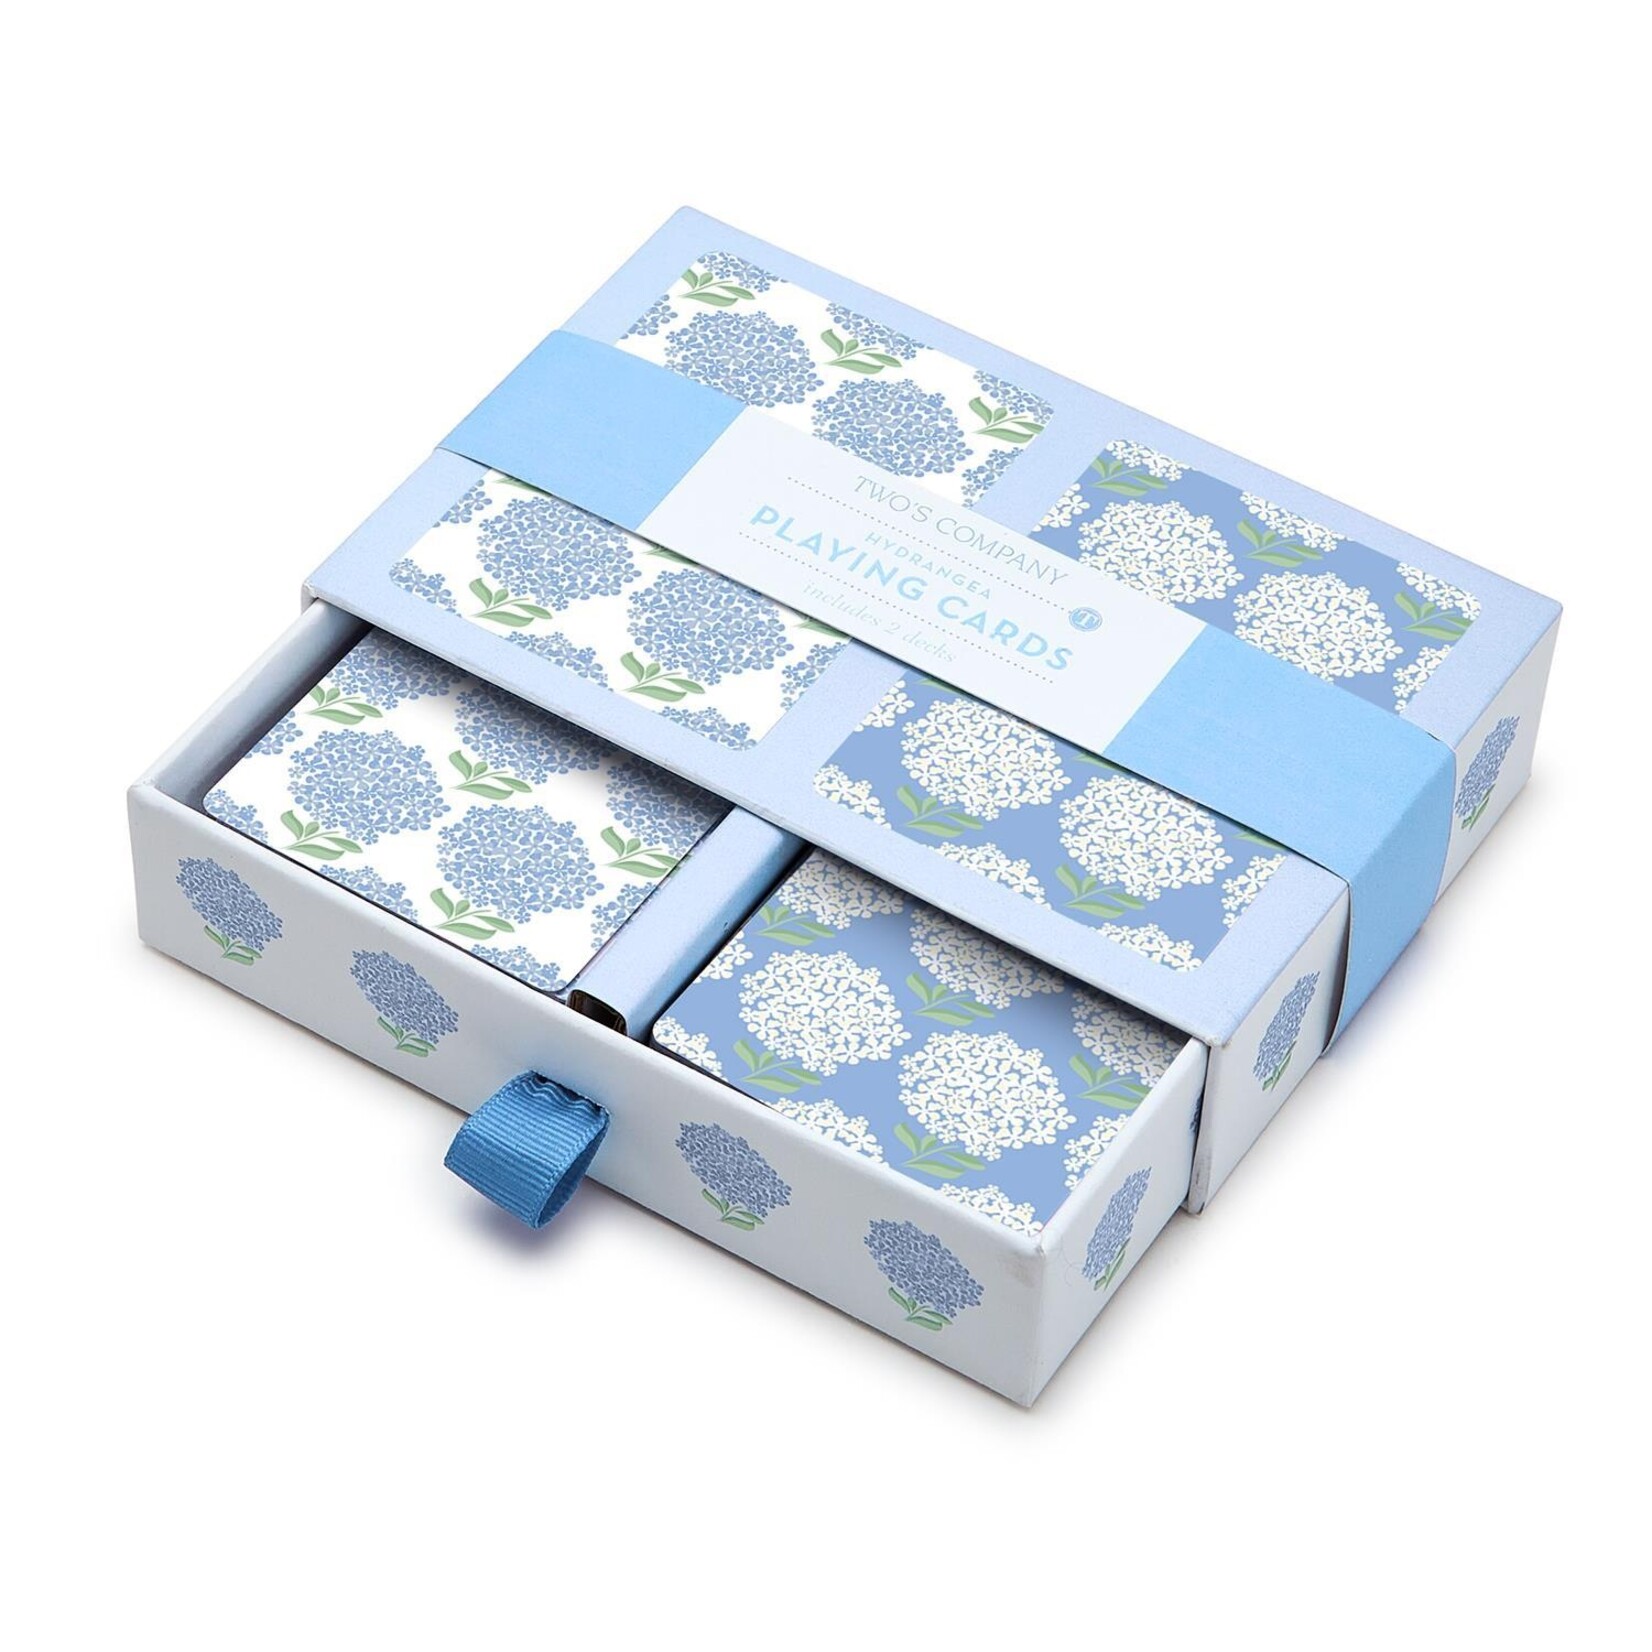 Two's Company HYDRANGEA DOUBLE DECK TEXTURED PLAYING CARDS IN GIFT BOX